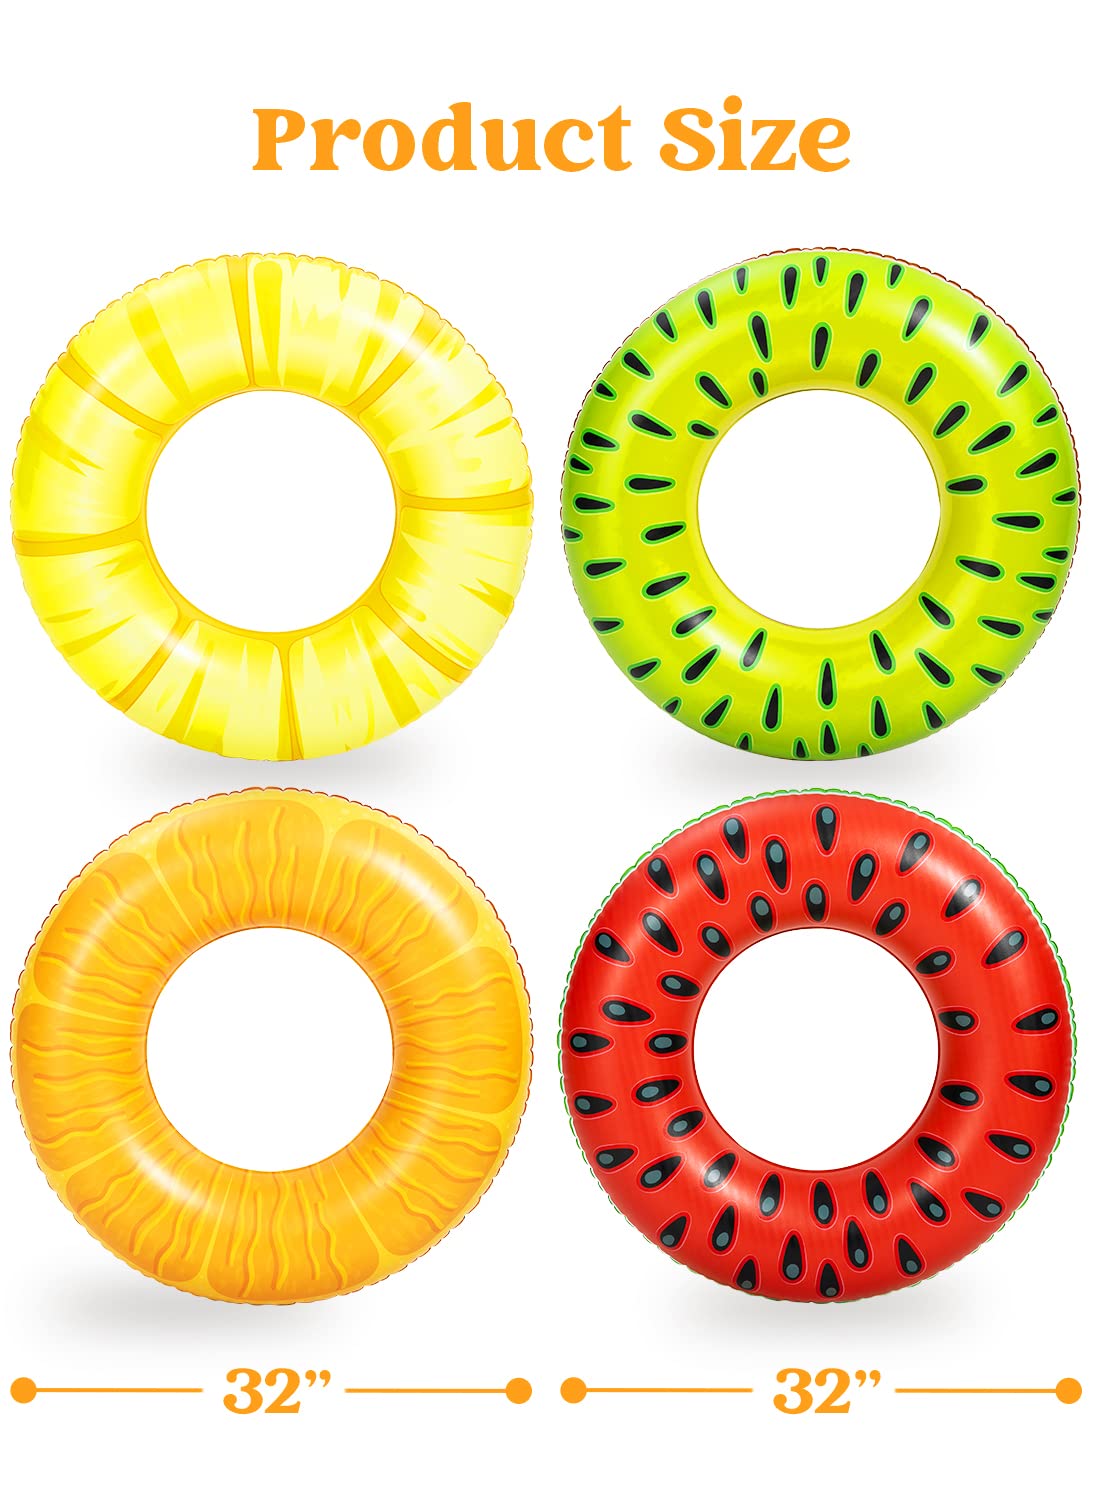 Sloosh 4 Pack Inflatable Pool Floats Fruit Tube Rings, Fruit Pool Tubes, Pool Floaties Toys, Beach Swimming Party Toys for Kids and Adults